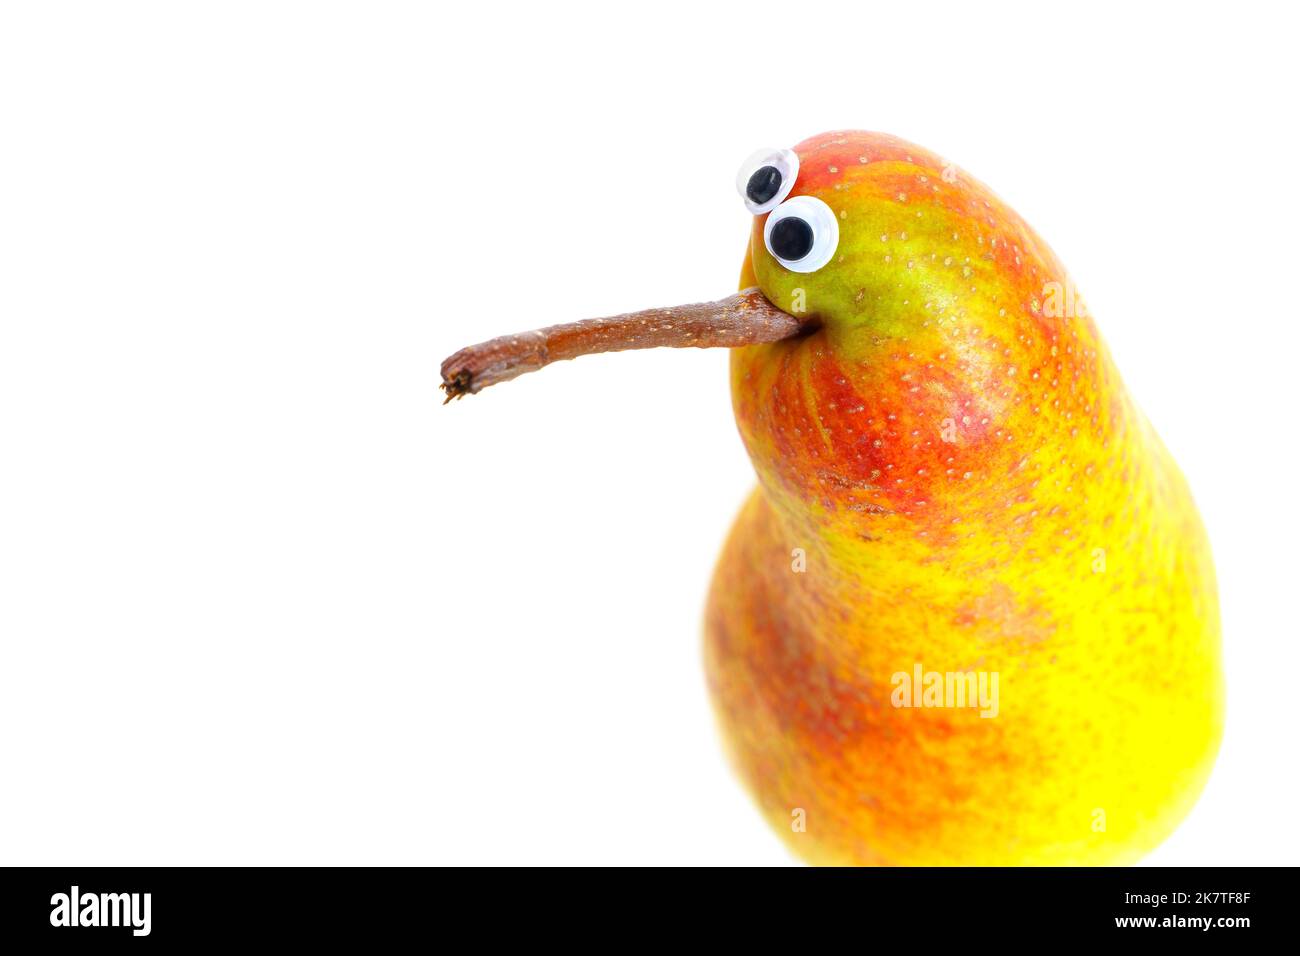 Funny pear character with googly eyes isolated on white background with copy space. Stock Photo